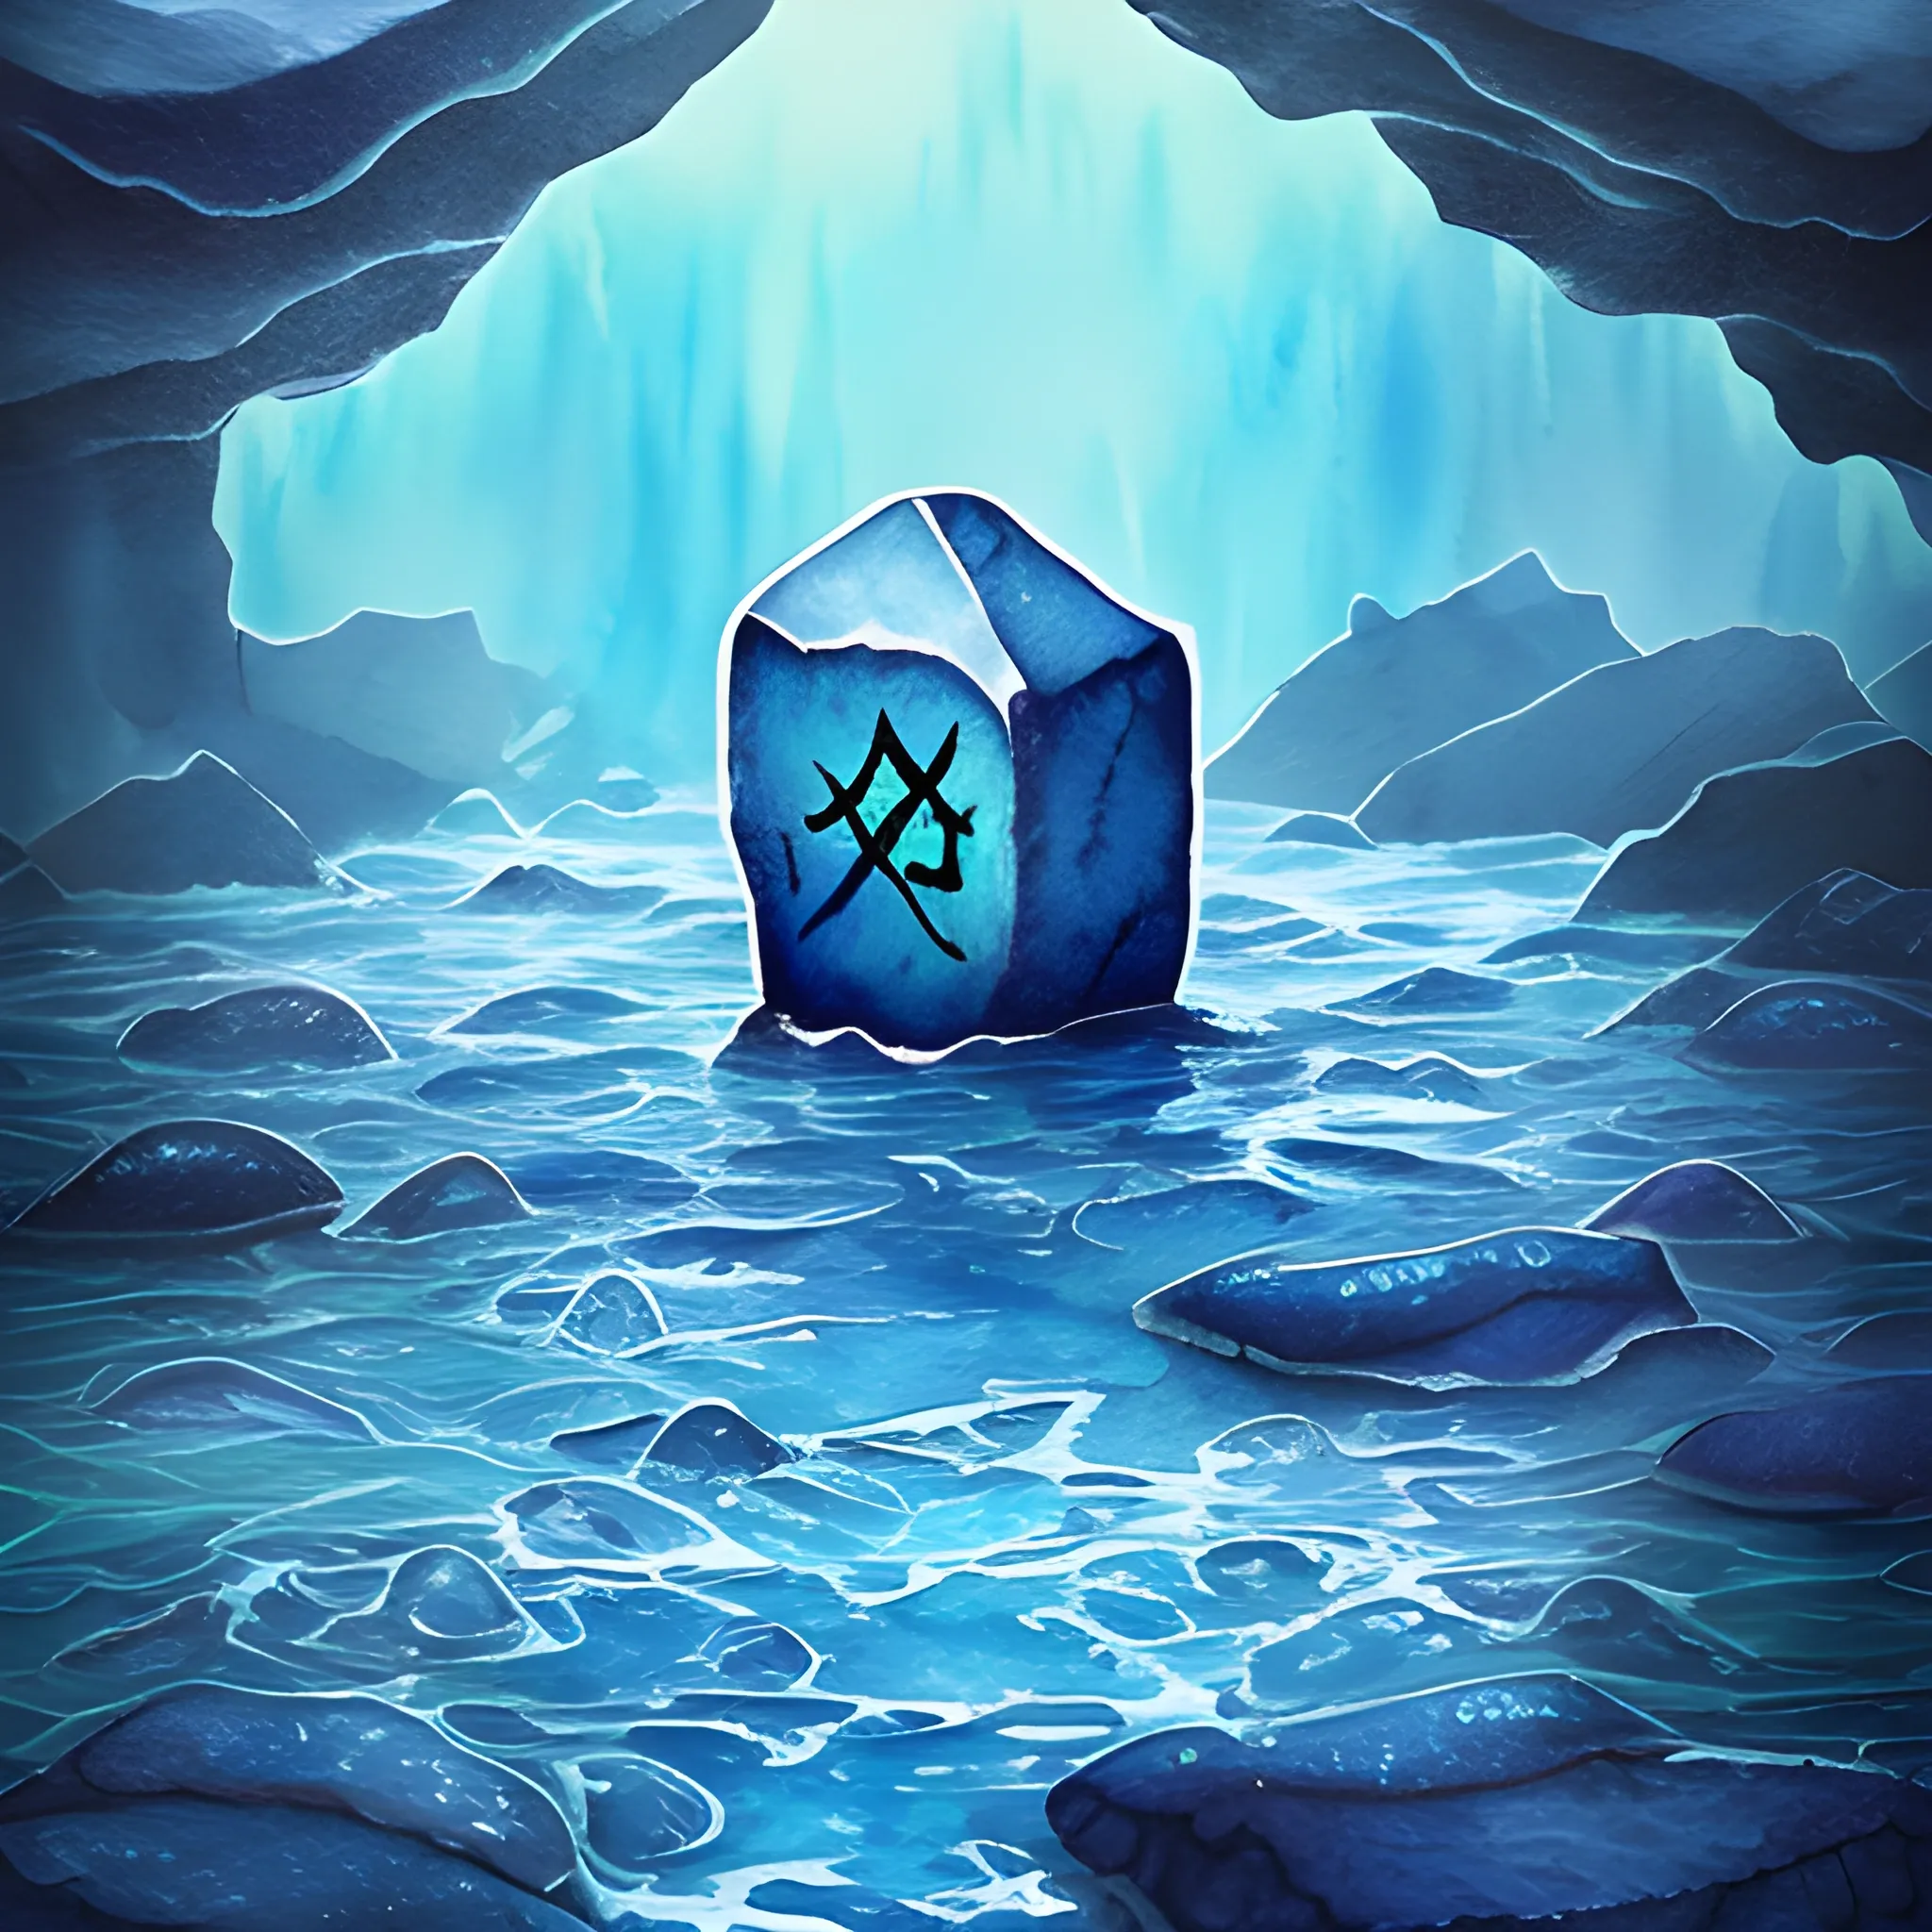 , Trippy, Water Color, abyssal water, dark blue, runic stones,
realistic water background